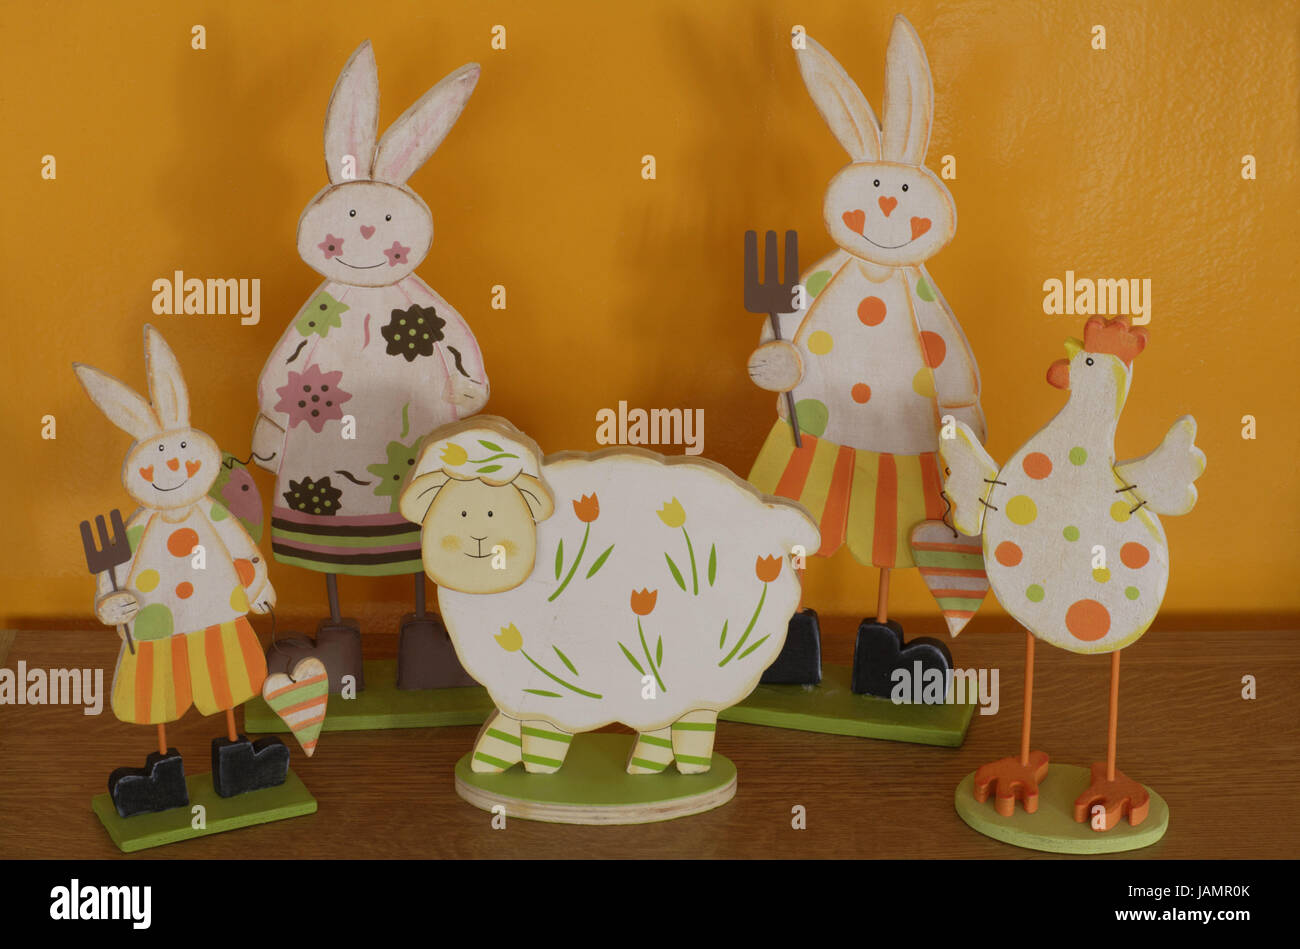 Easter decoration,wooden characters,Easter,decoration,wooden decoration,Easter jewellery,characters,woodwork,Easter bunny,Easter bunny family,paschal lamb,chicken,colourfully,brightly,hobby,season,spring, Stock Photo